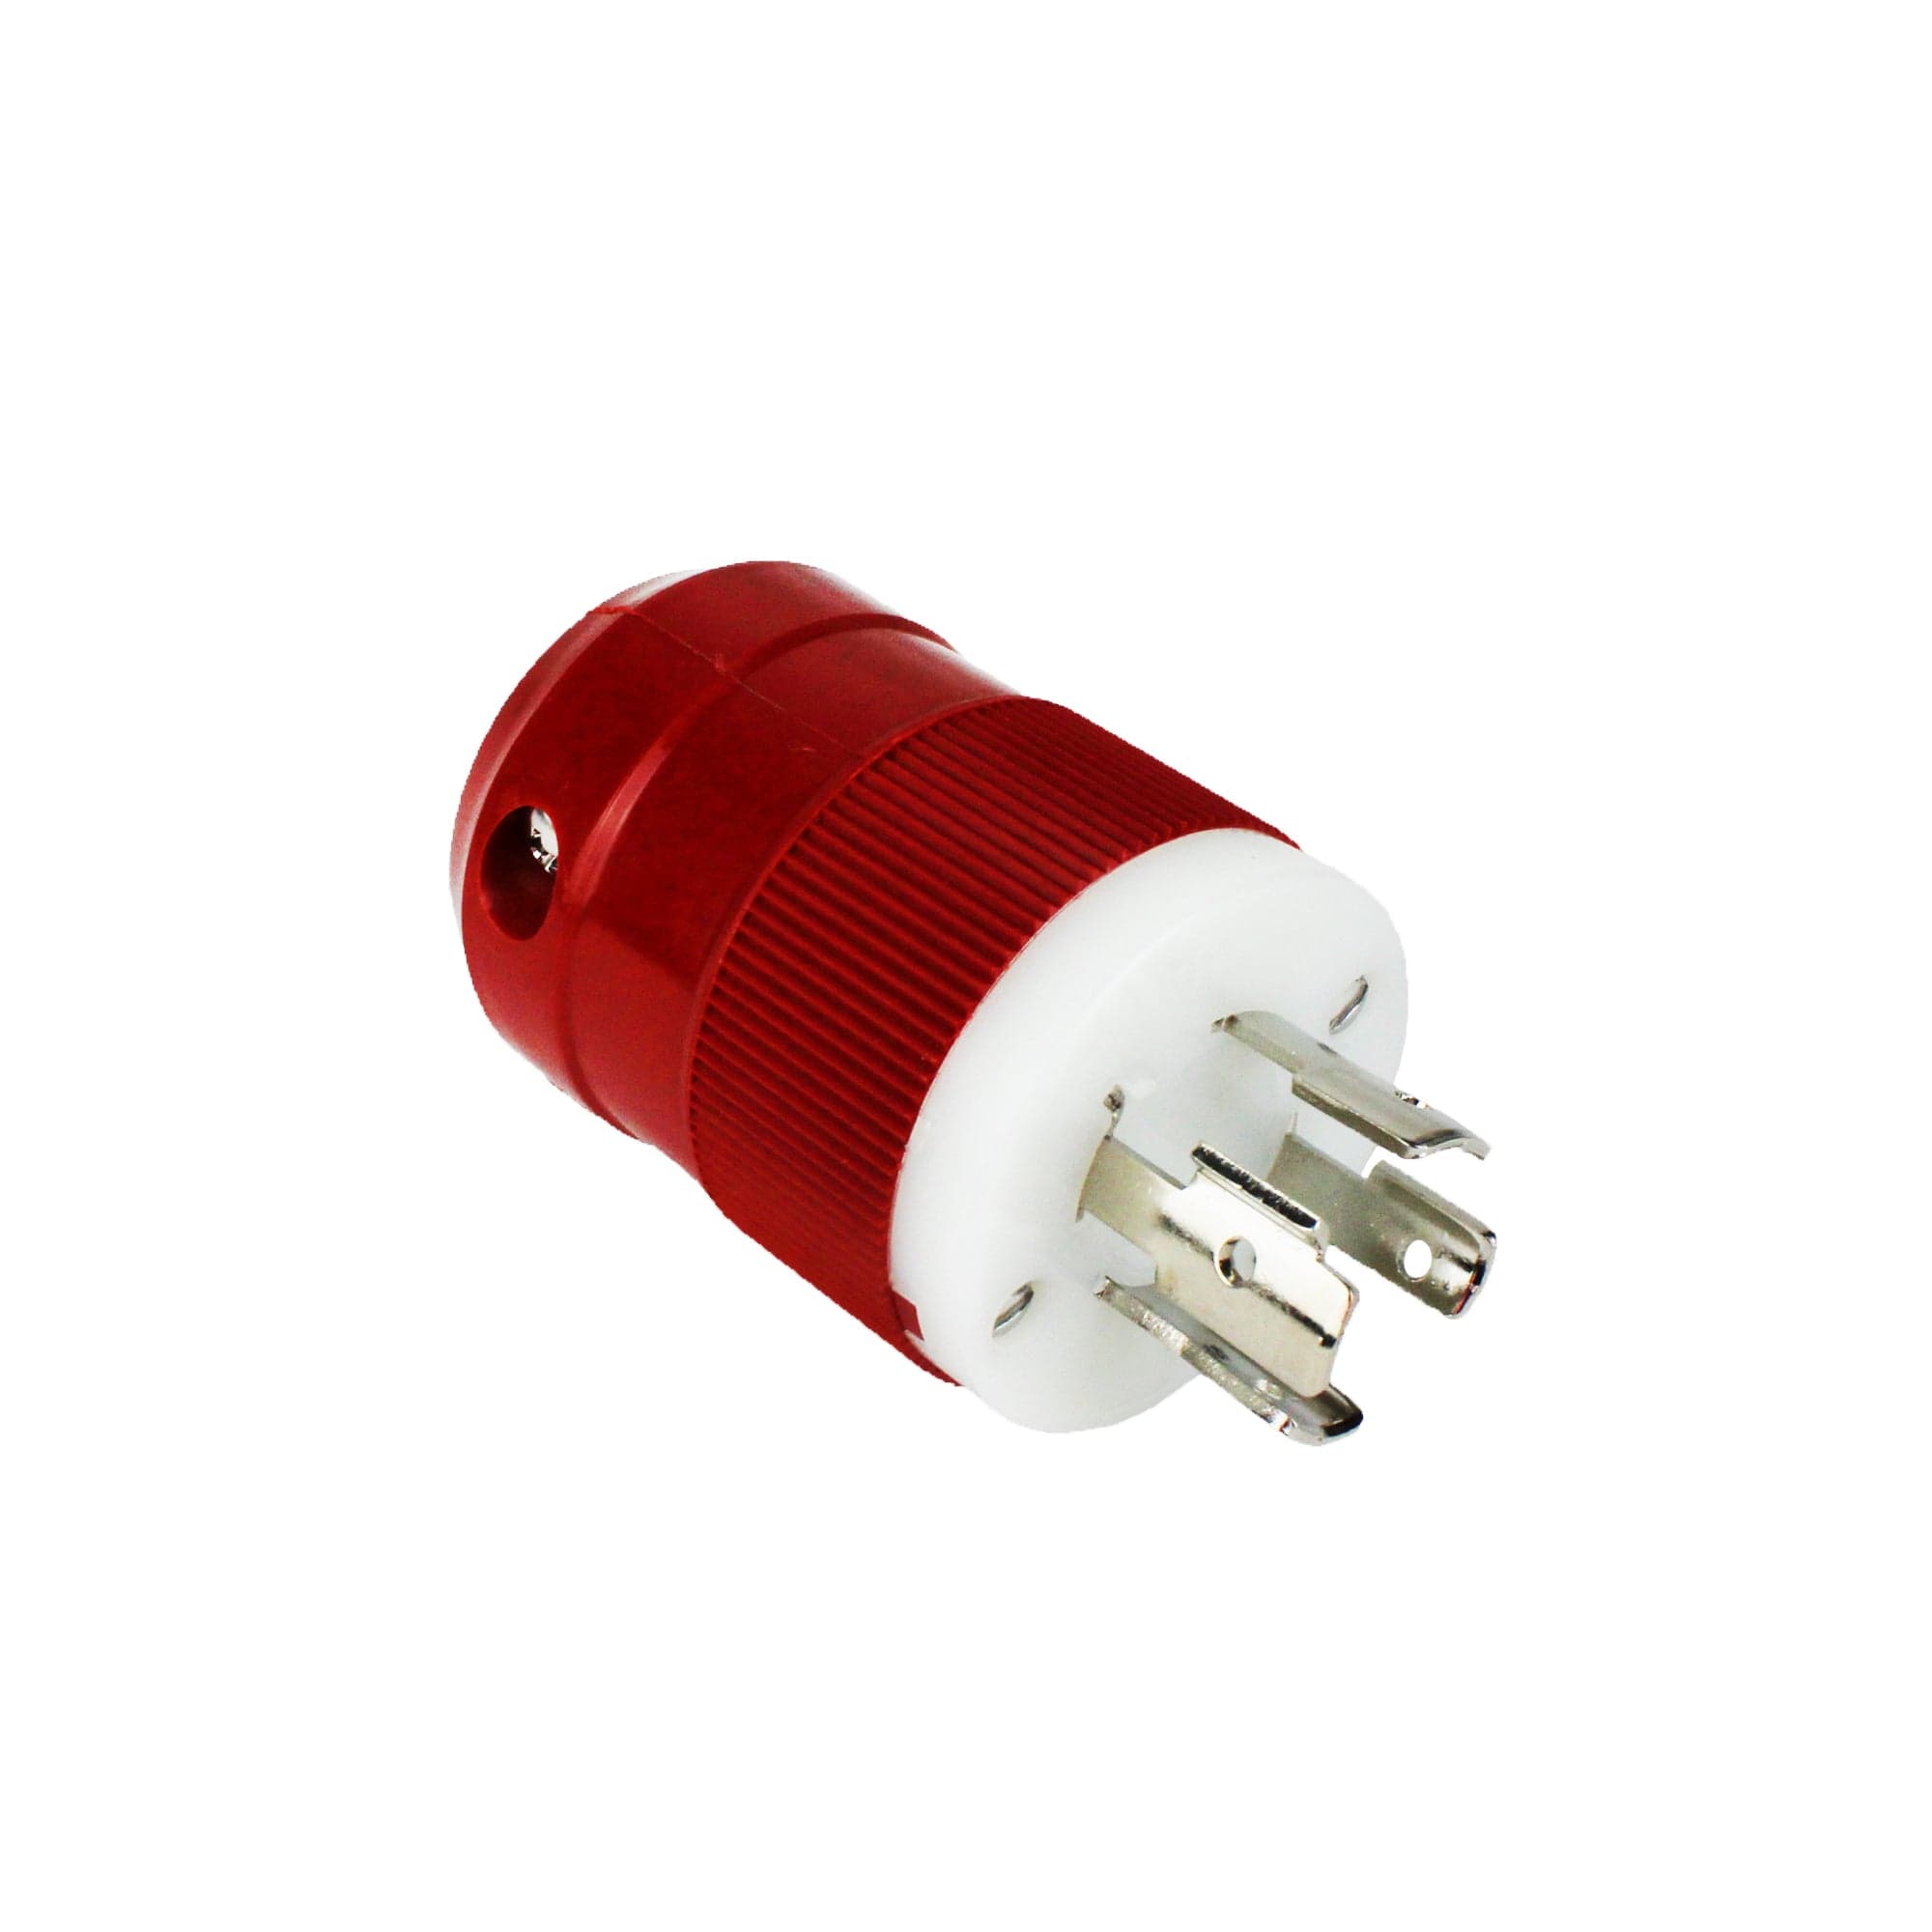 Marinco 2018BP-12 4-Wire 12/24V Trolling Charger Plug, Red